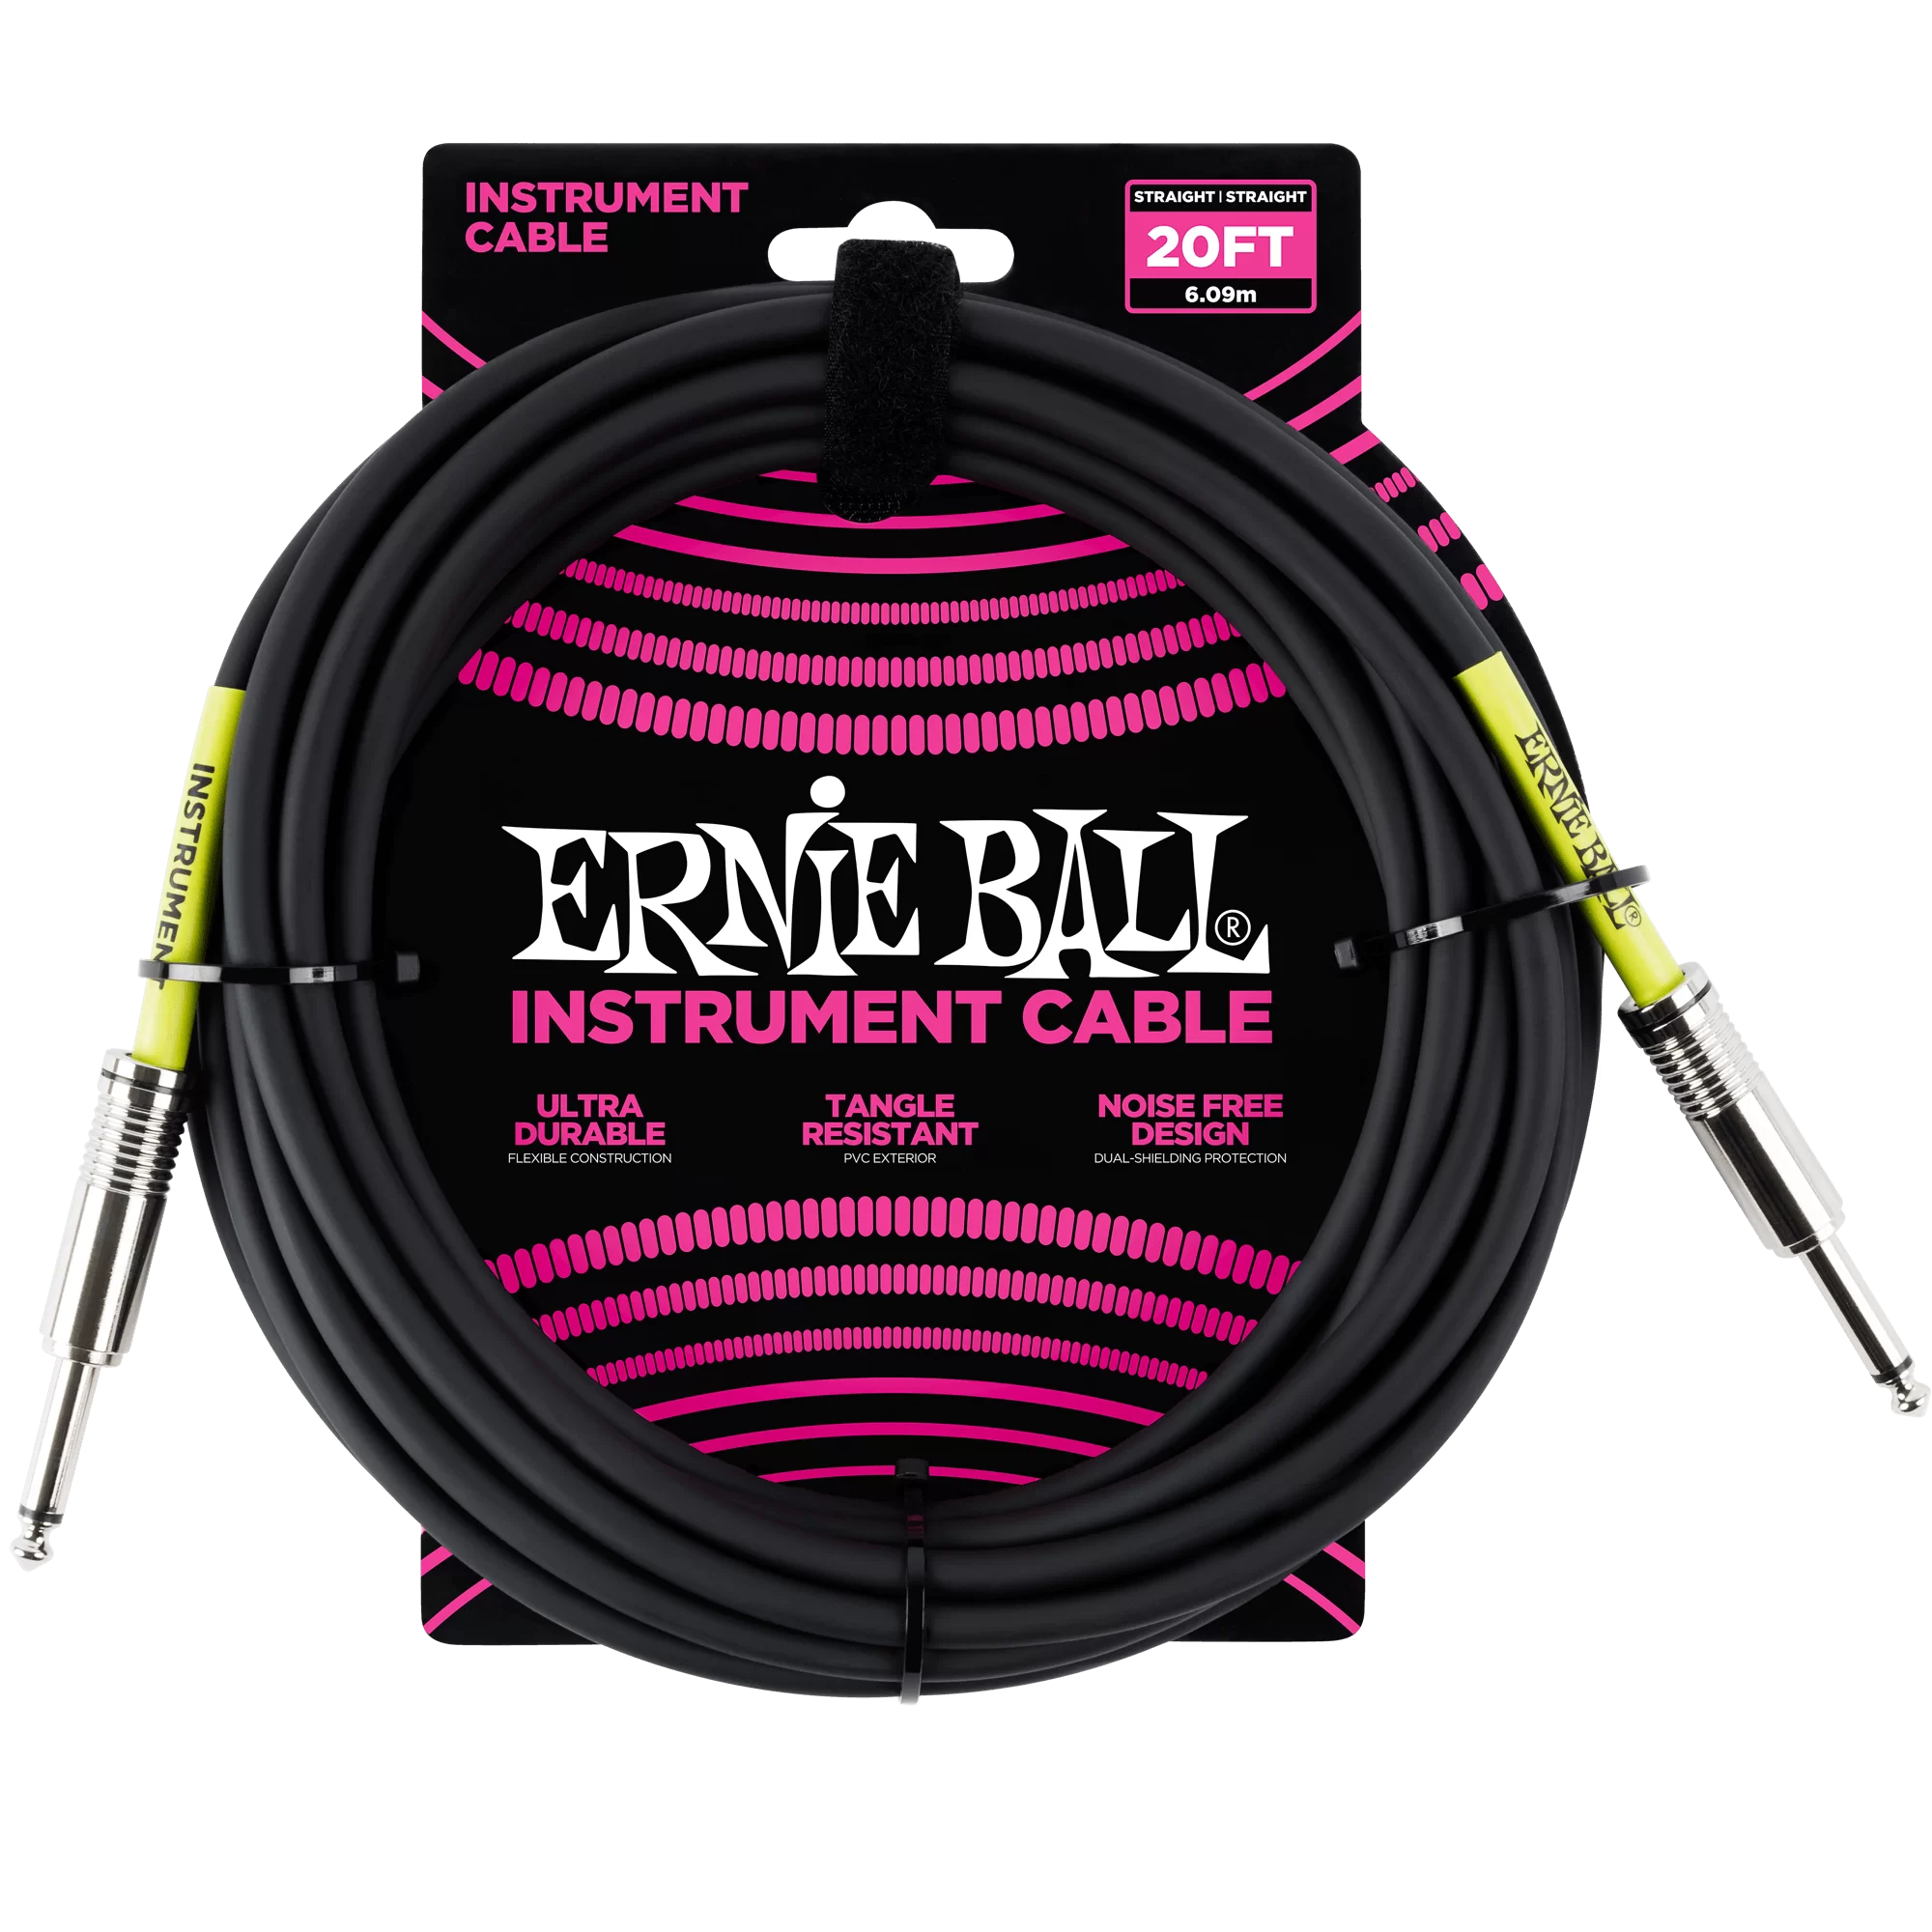 Ernie Ball Instrument Cable 6m (20FT) Sort